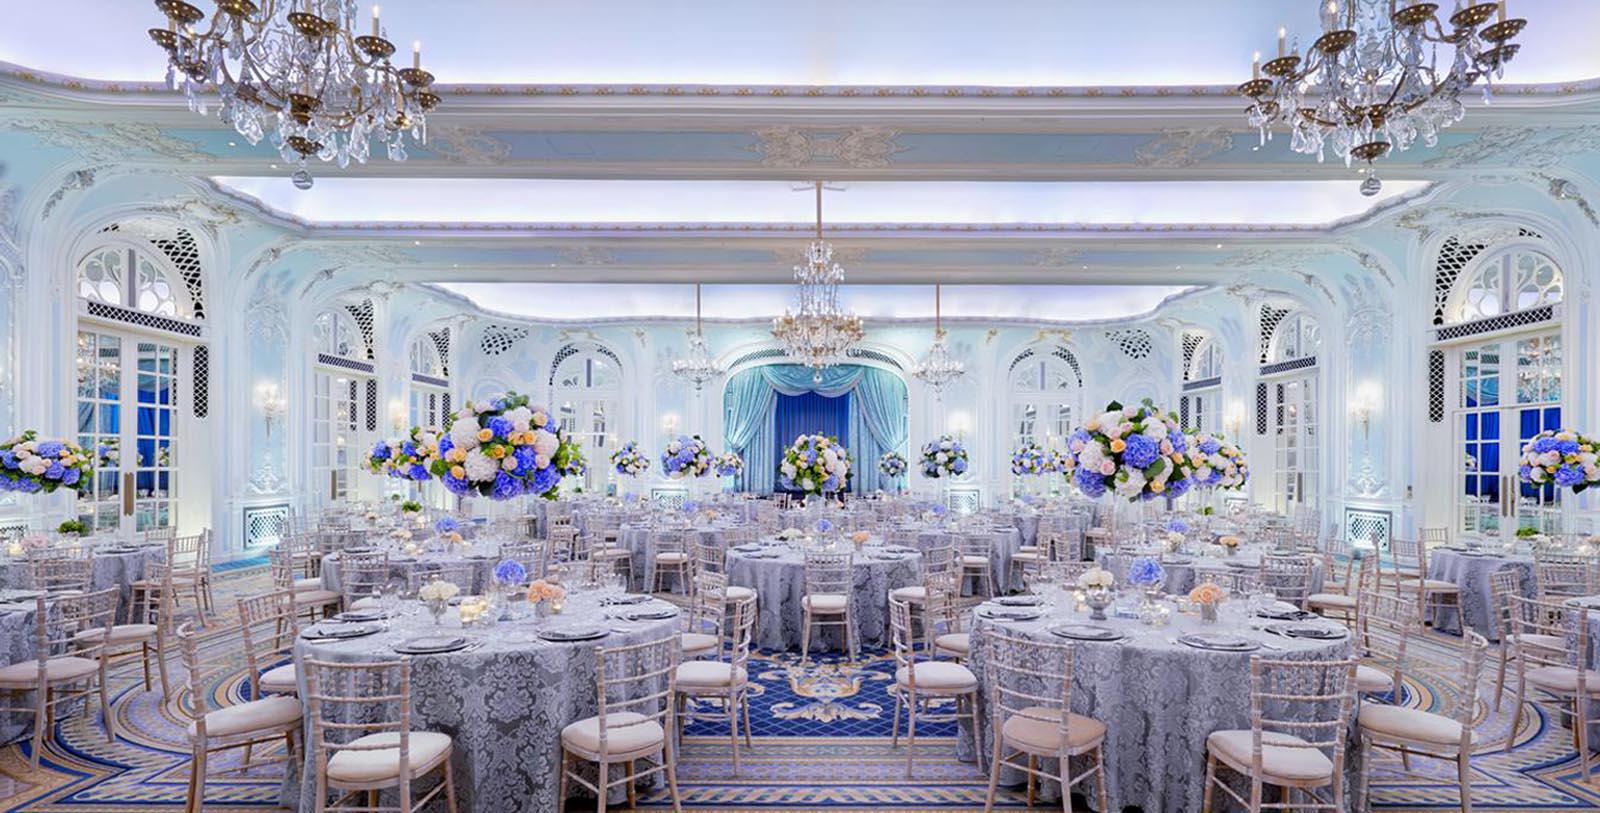 Image of the Lancaster Ballroom at The Savoy London, 1889, Member of Historic Hotels Worldwide, in London, England, United Kingdom, Special Occasions